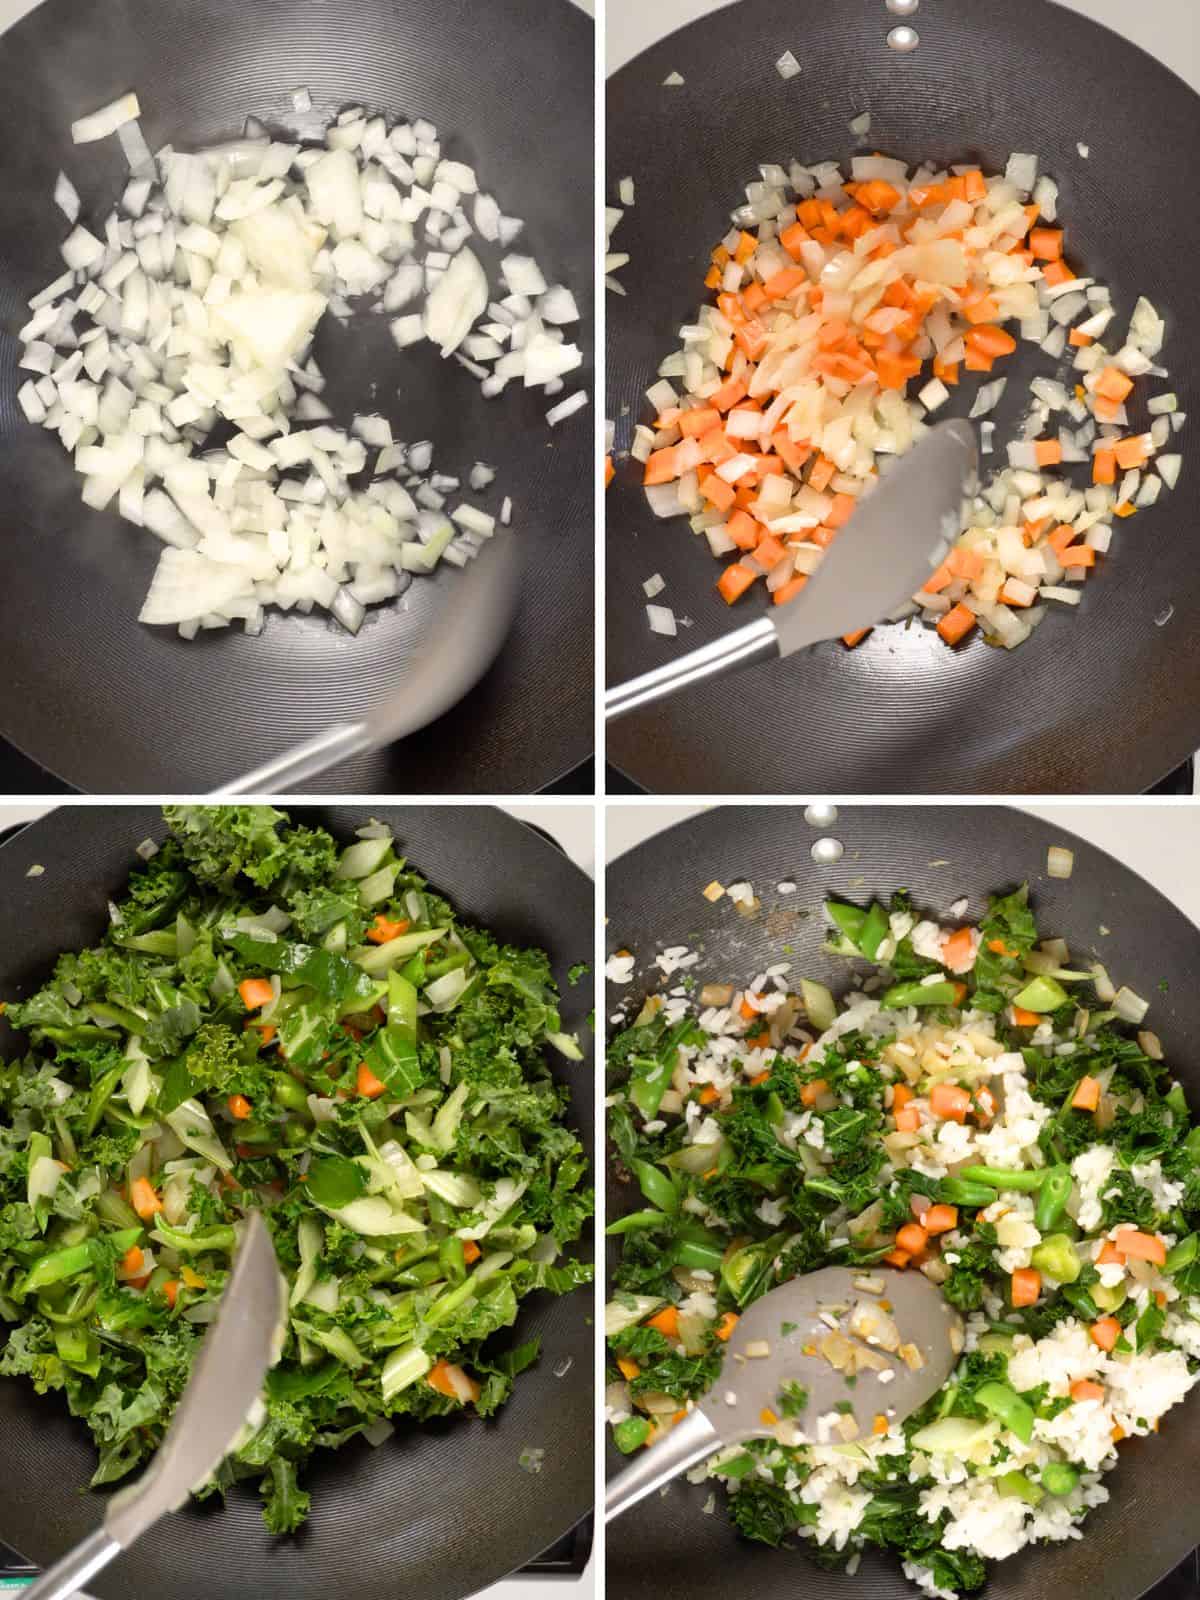 photos showing the different stages of cooking vegan oil free fried rice